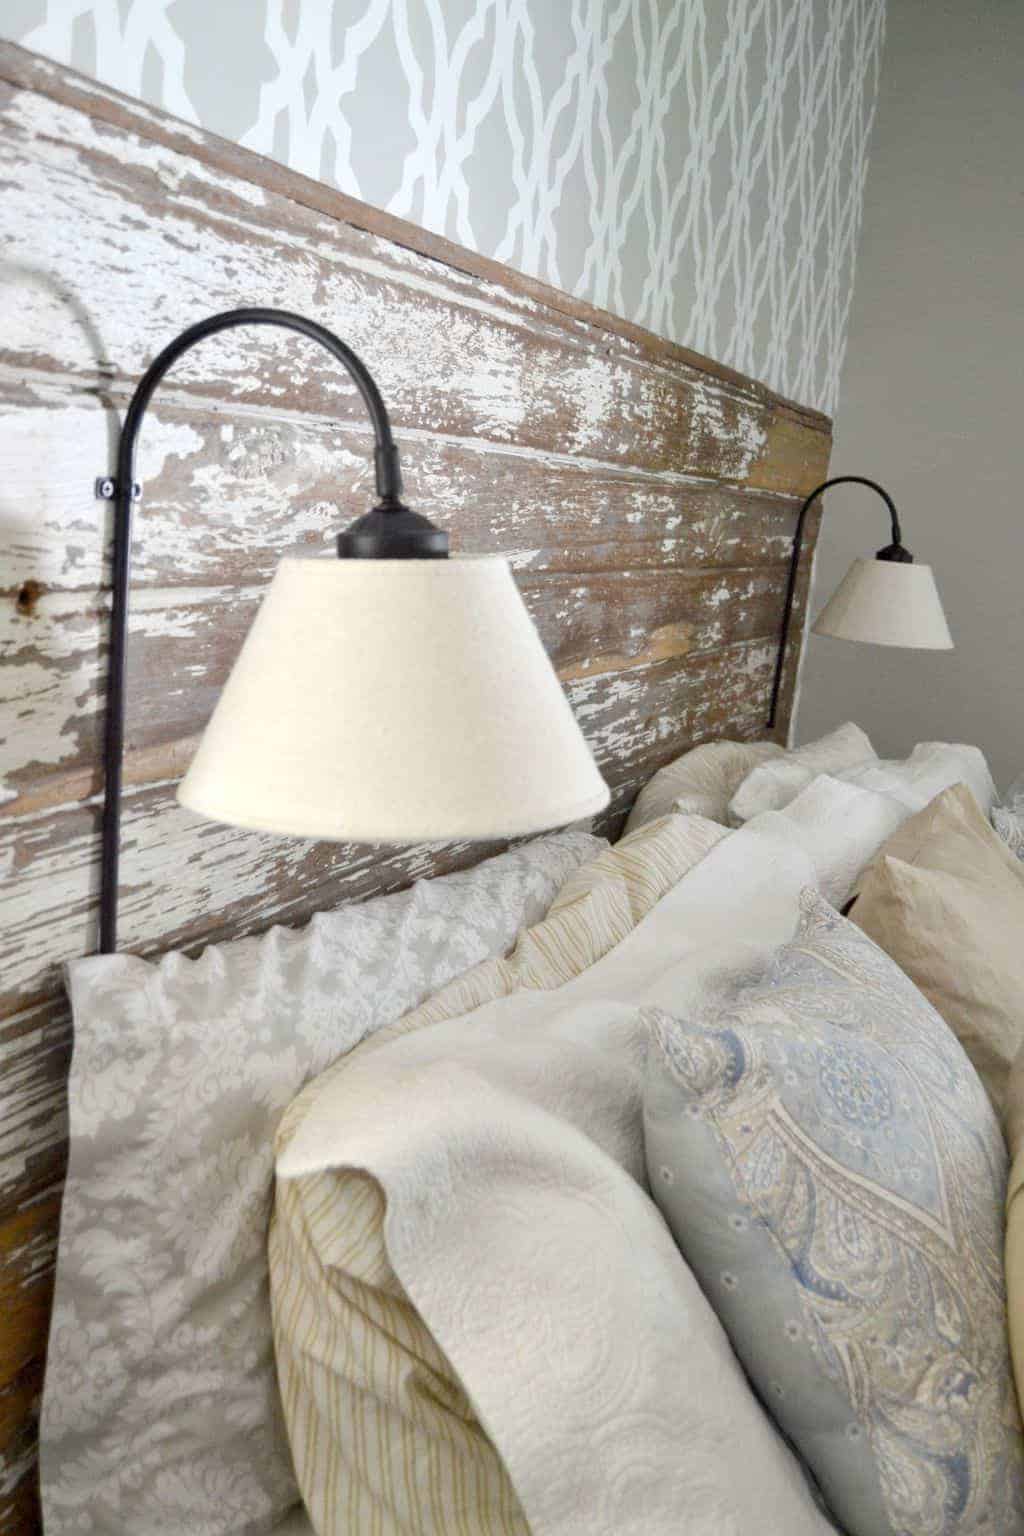 Repurposed Lamps Become Diy Plug In Wall Sconce For Headboard,Horseradish Sauce For Beef Recipe